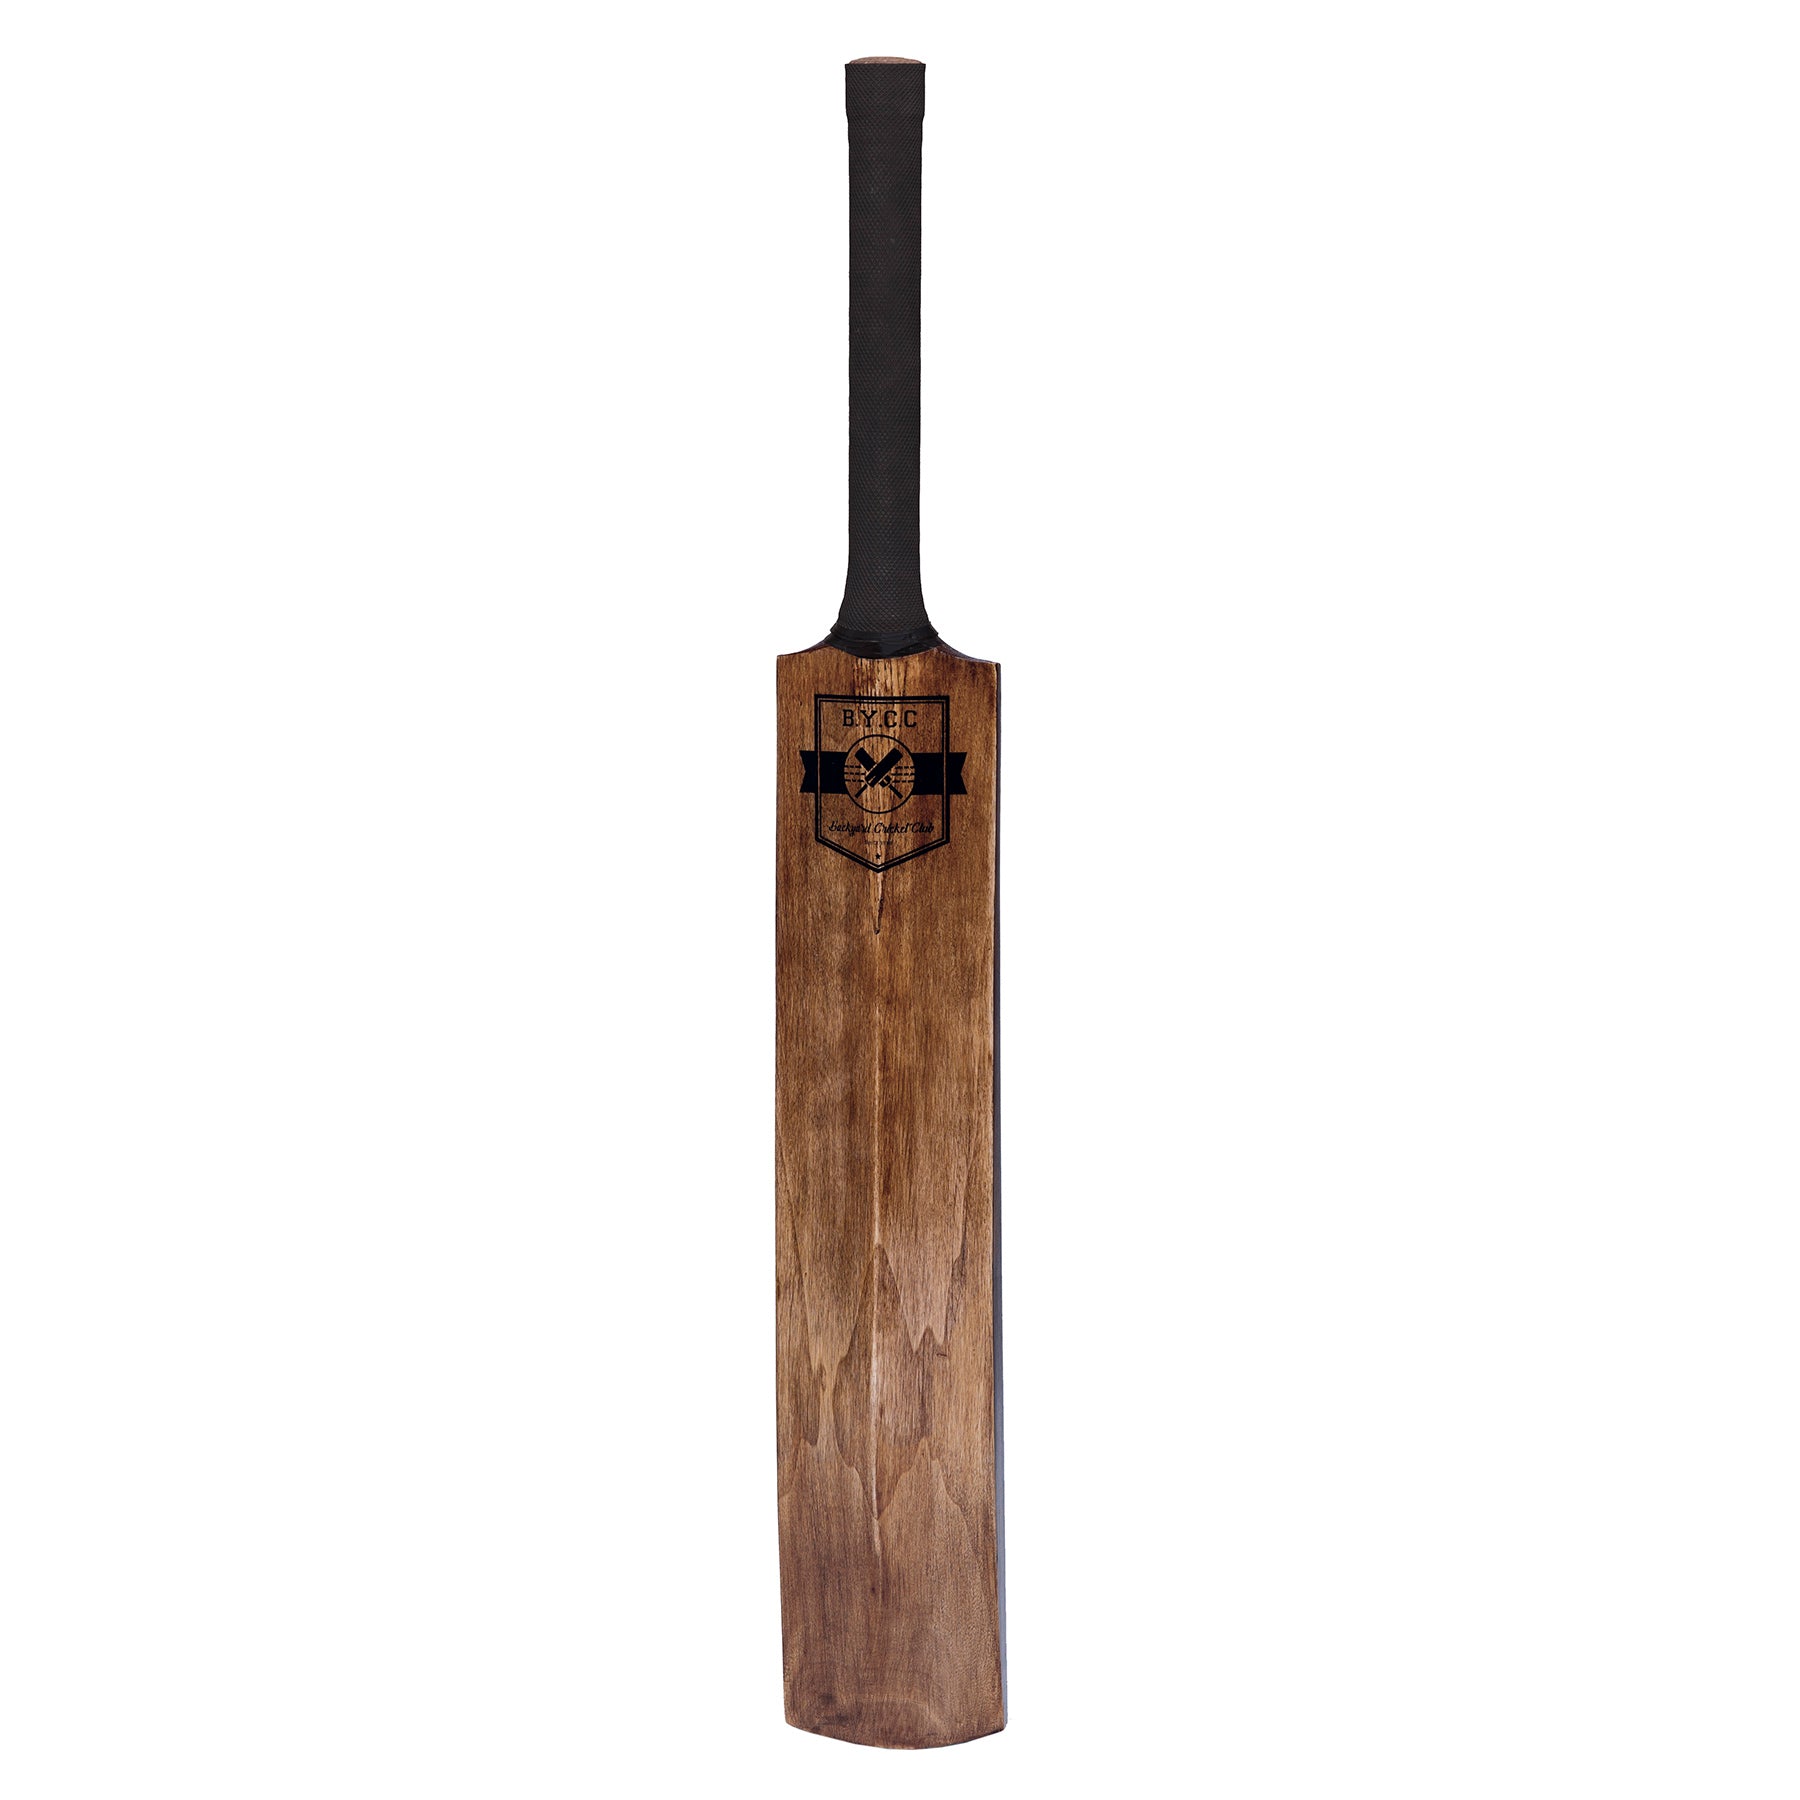 Timber cricket bat with antique wood grain